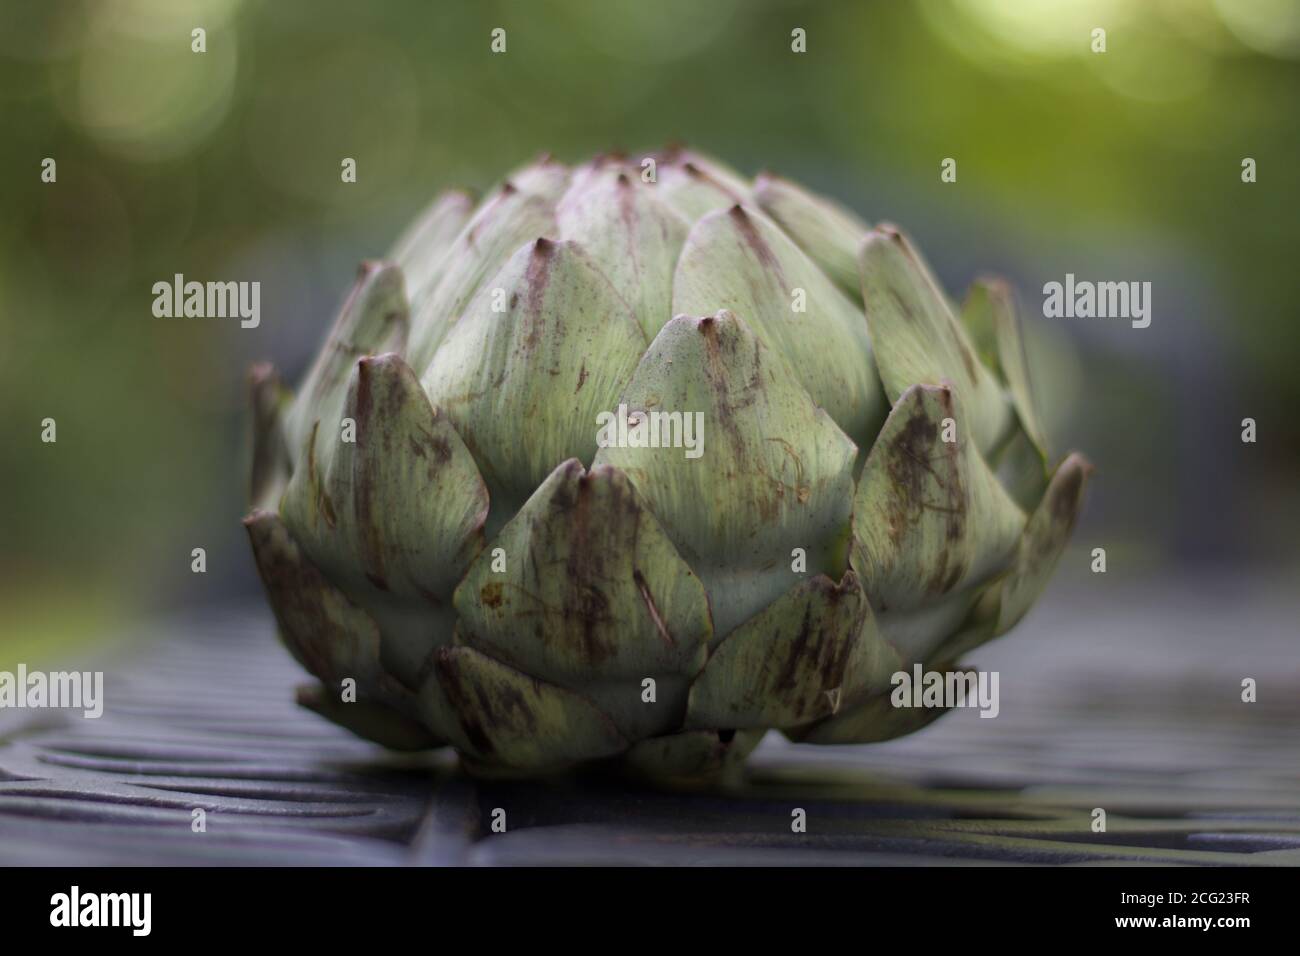 Green globe artichoke with soft blurred background with copy space  Stock Photo